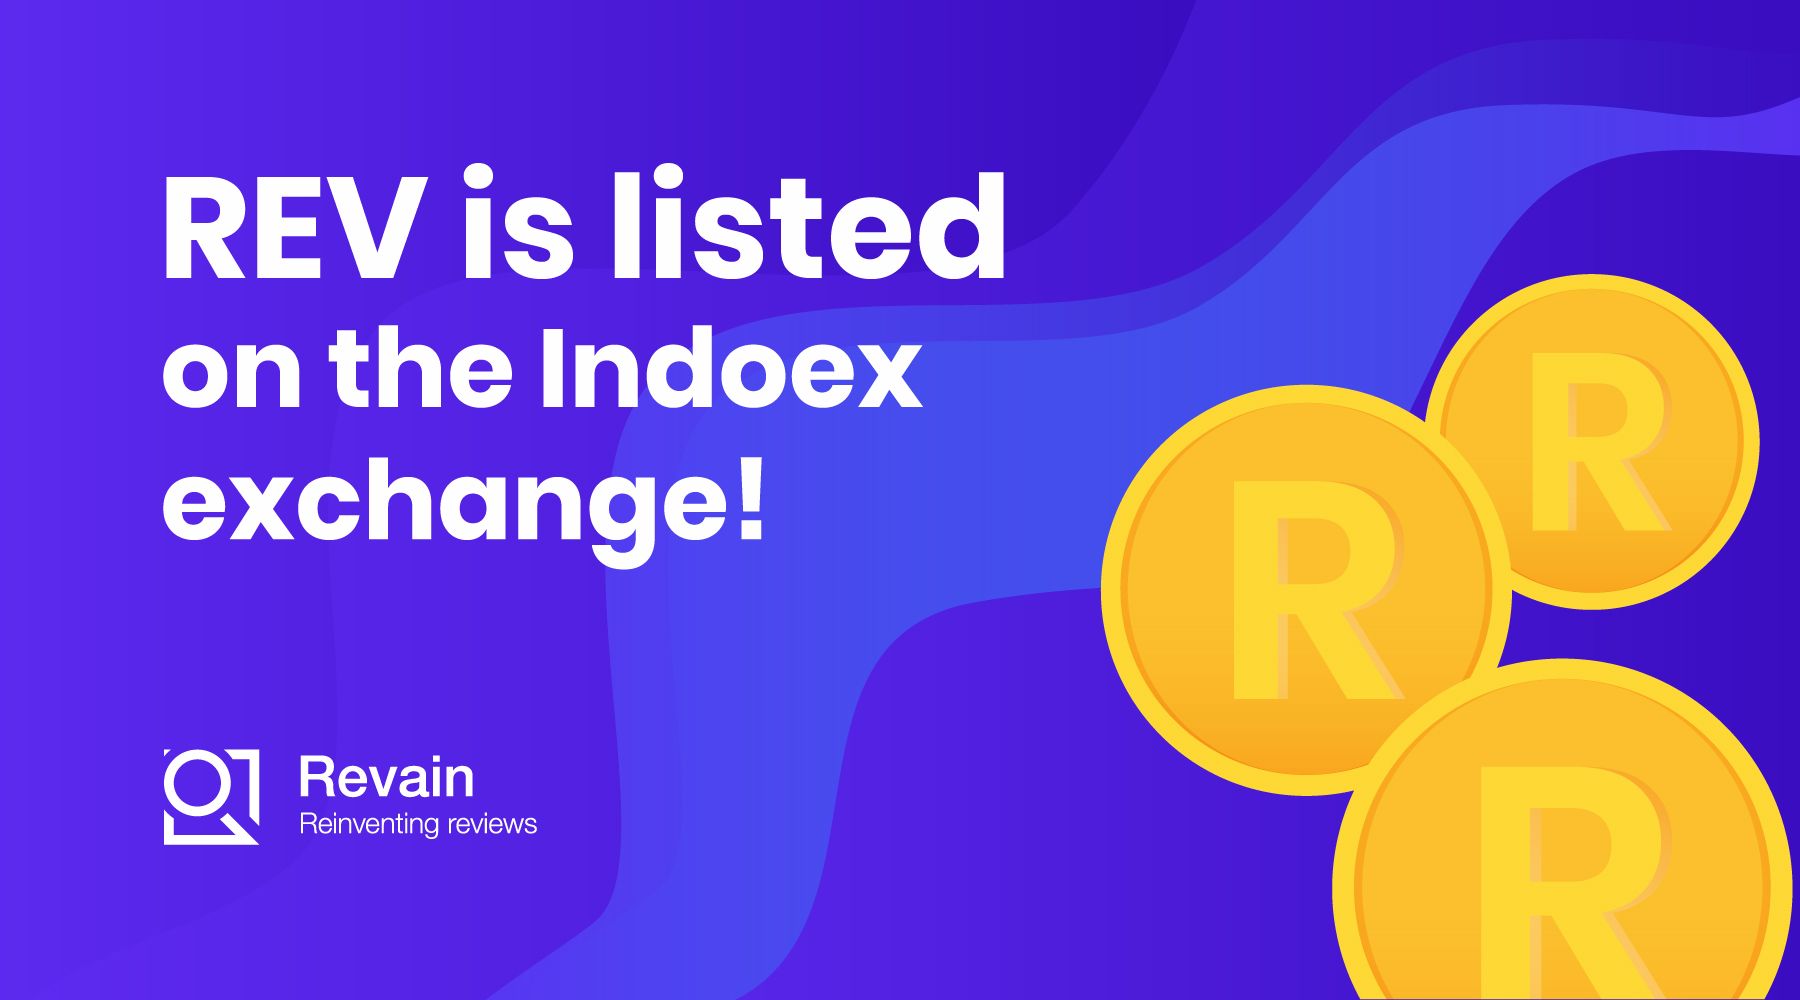 Article REV is listed on the Indoex exchange